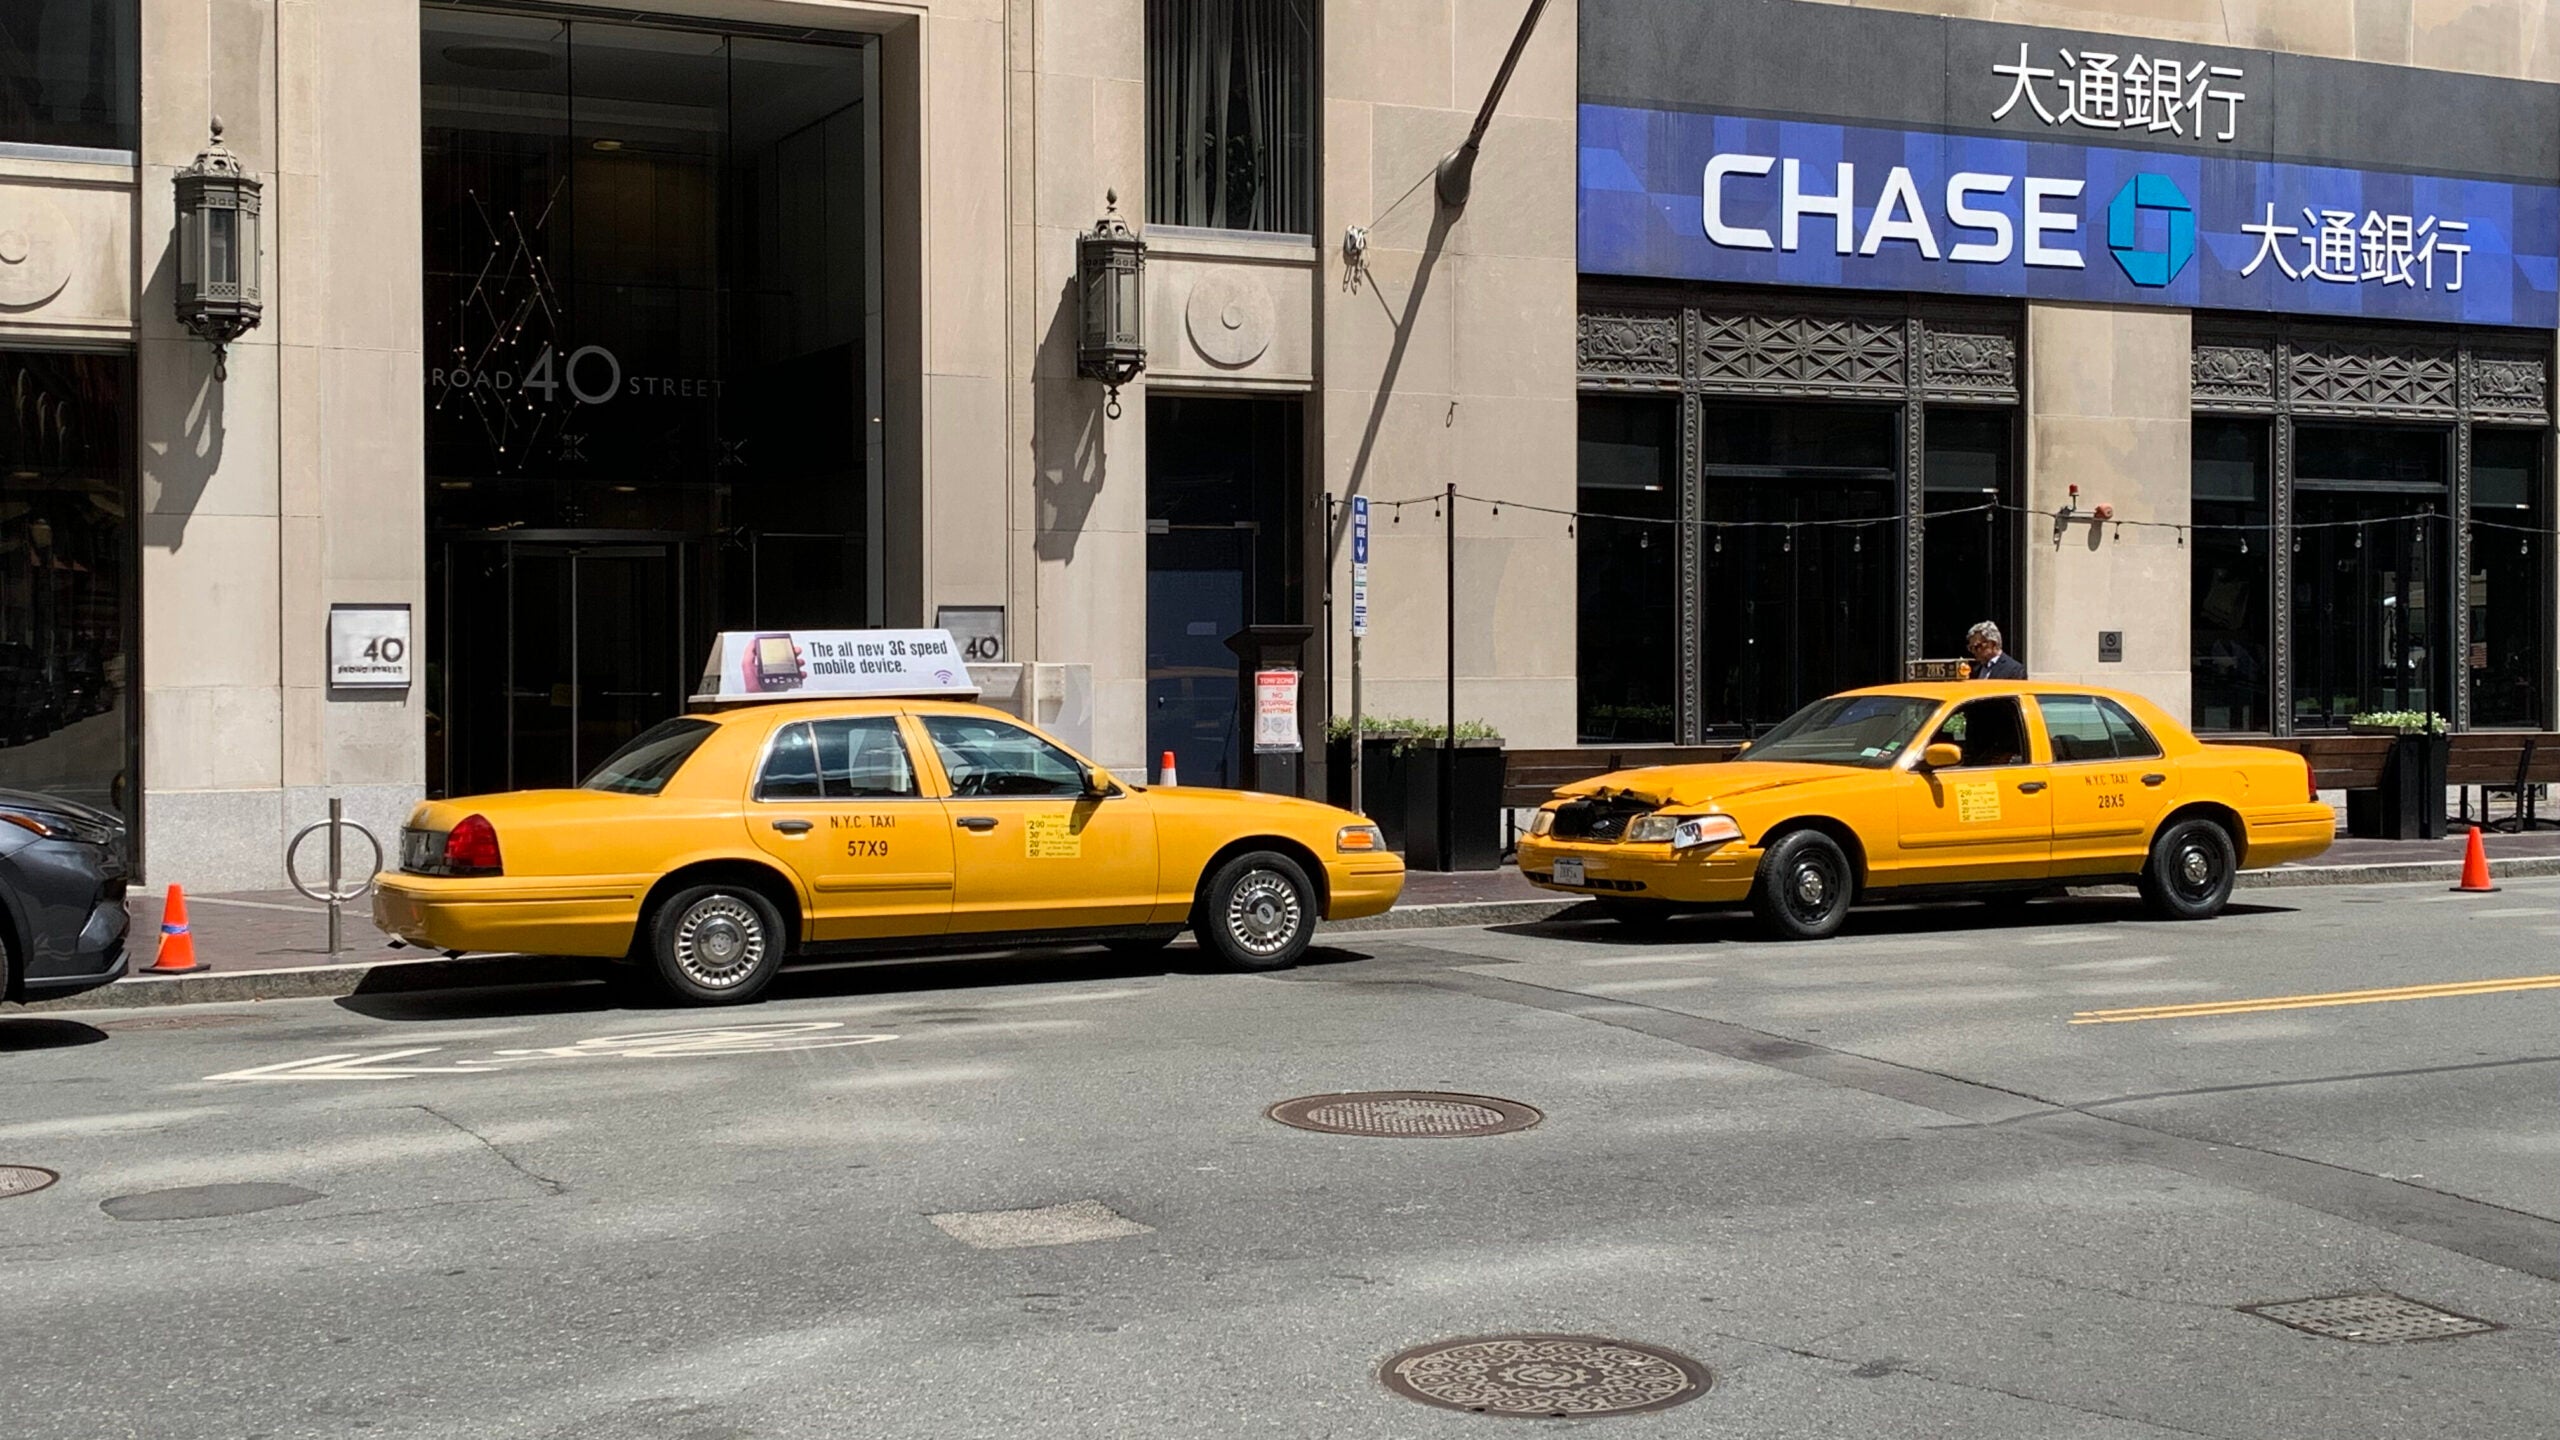 Two taxis used for the filming of the next Sony-Marvel movie 